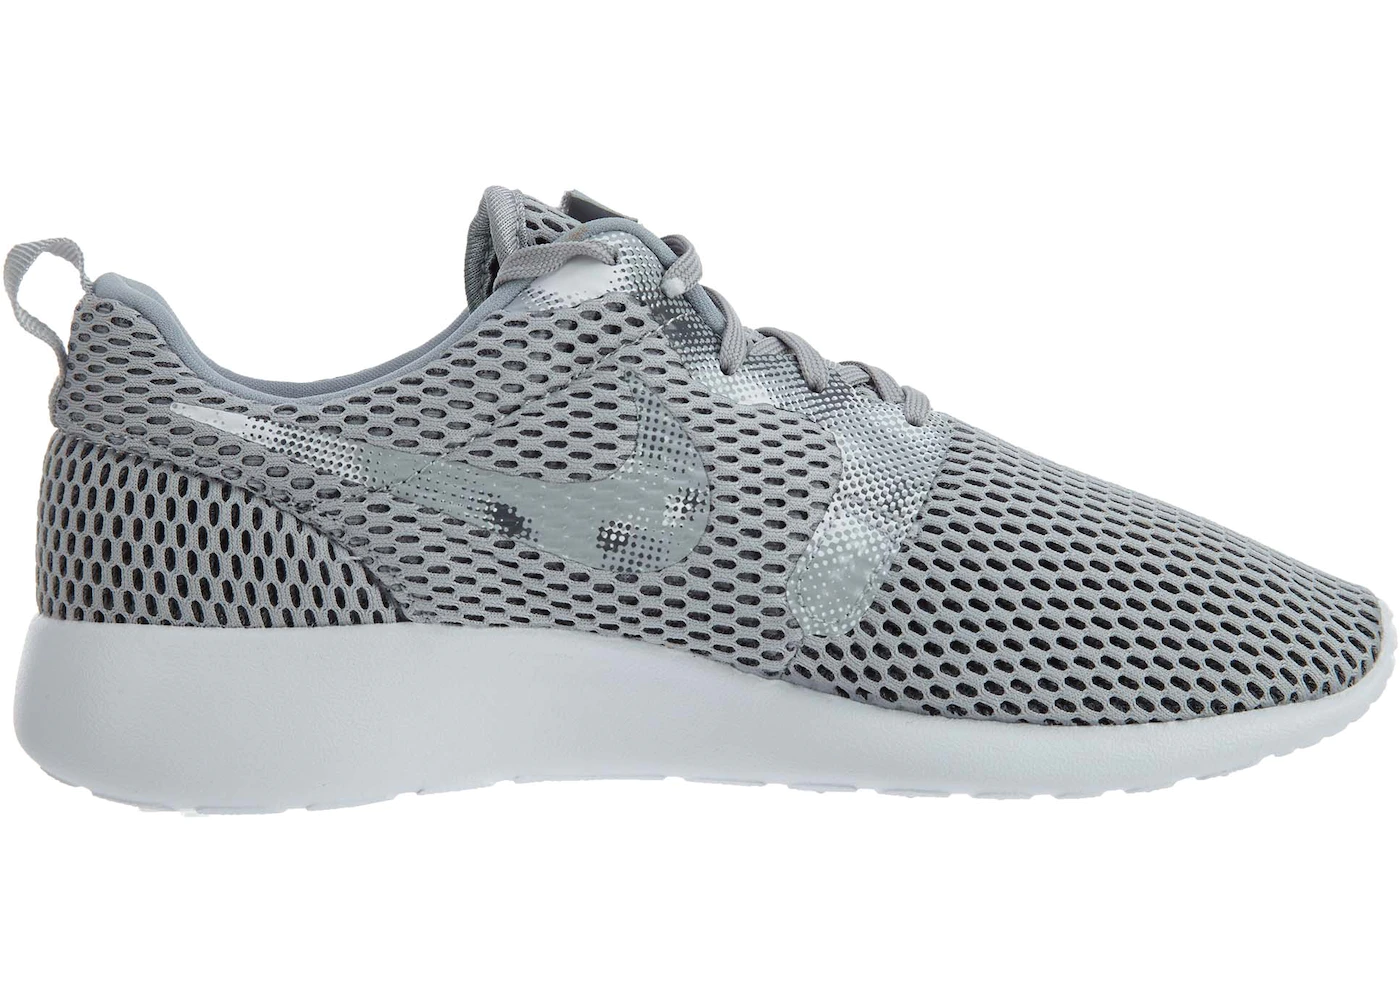 Men's Shoes Nike Roshe One Wolf Grey/ White Footshop, 60% OFF